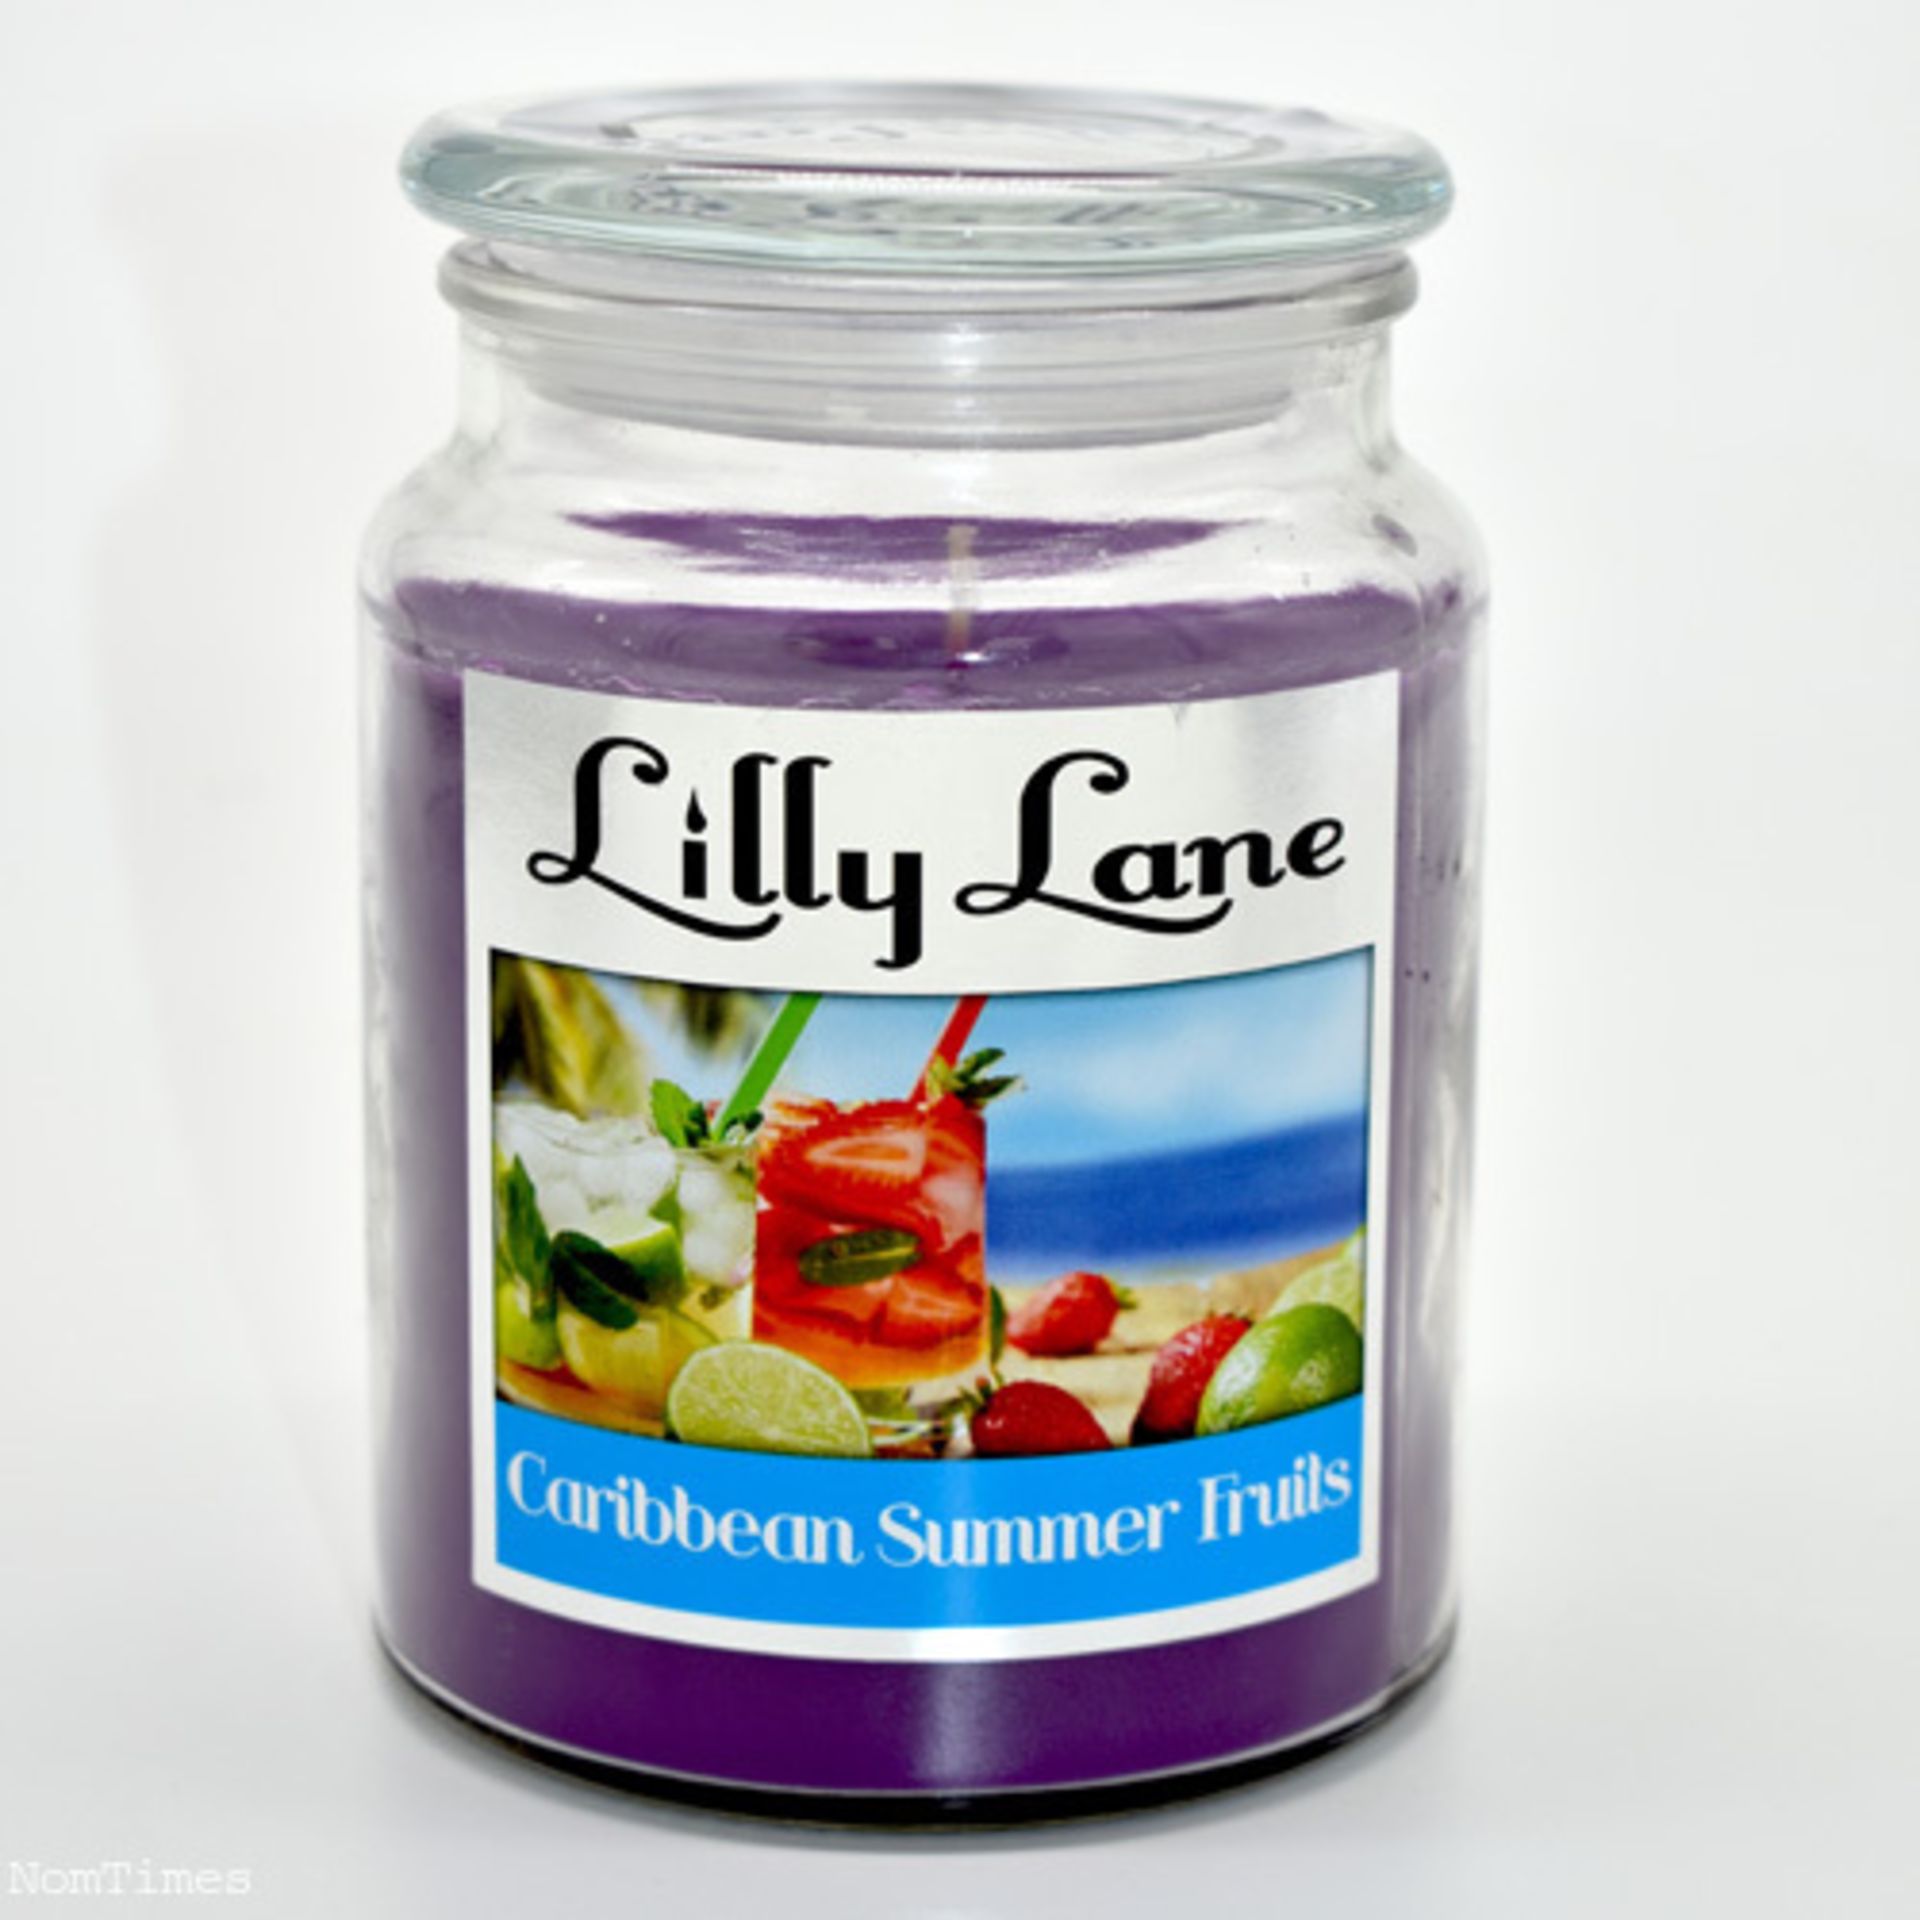 6pcs in carton brand new sealed Lilly Lane Carribean Summer Fruits 18oz long lasting strong